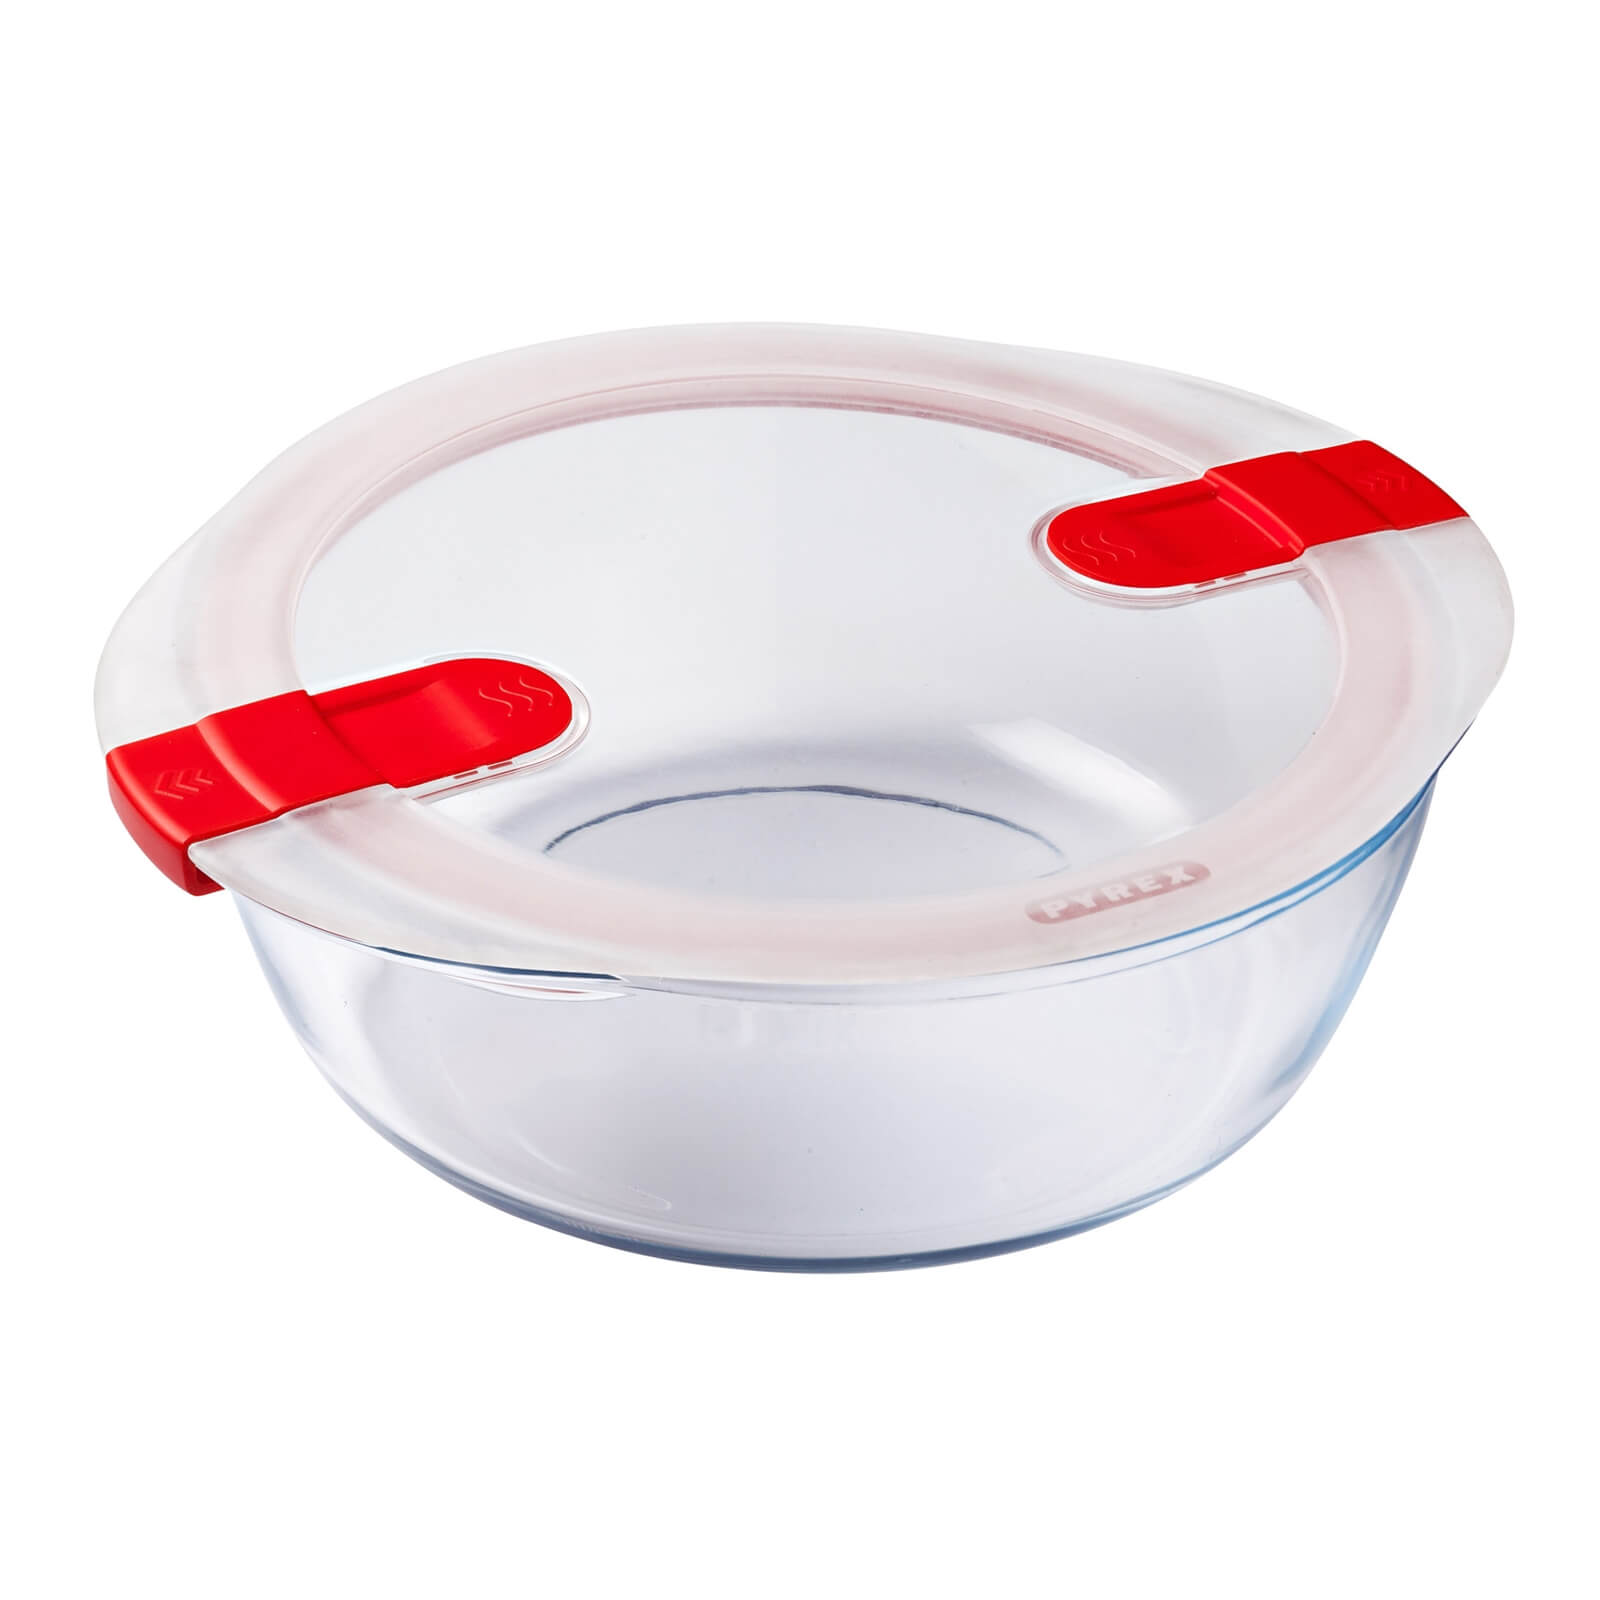 Pyrex Cook & Heat Round Dish with Lid